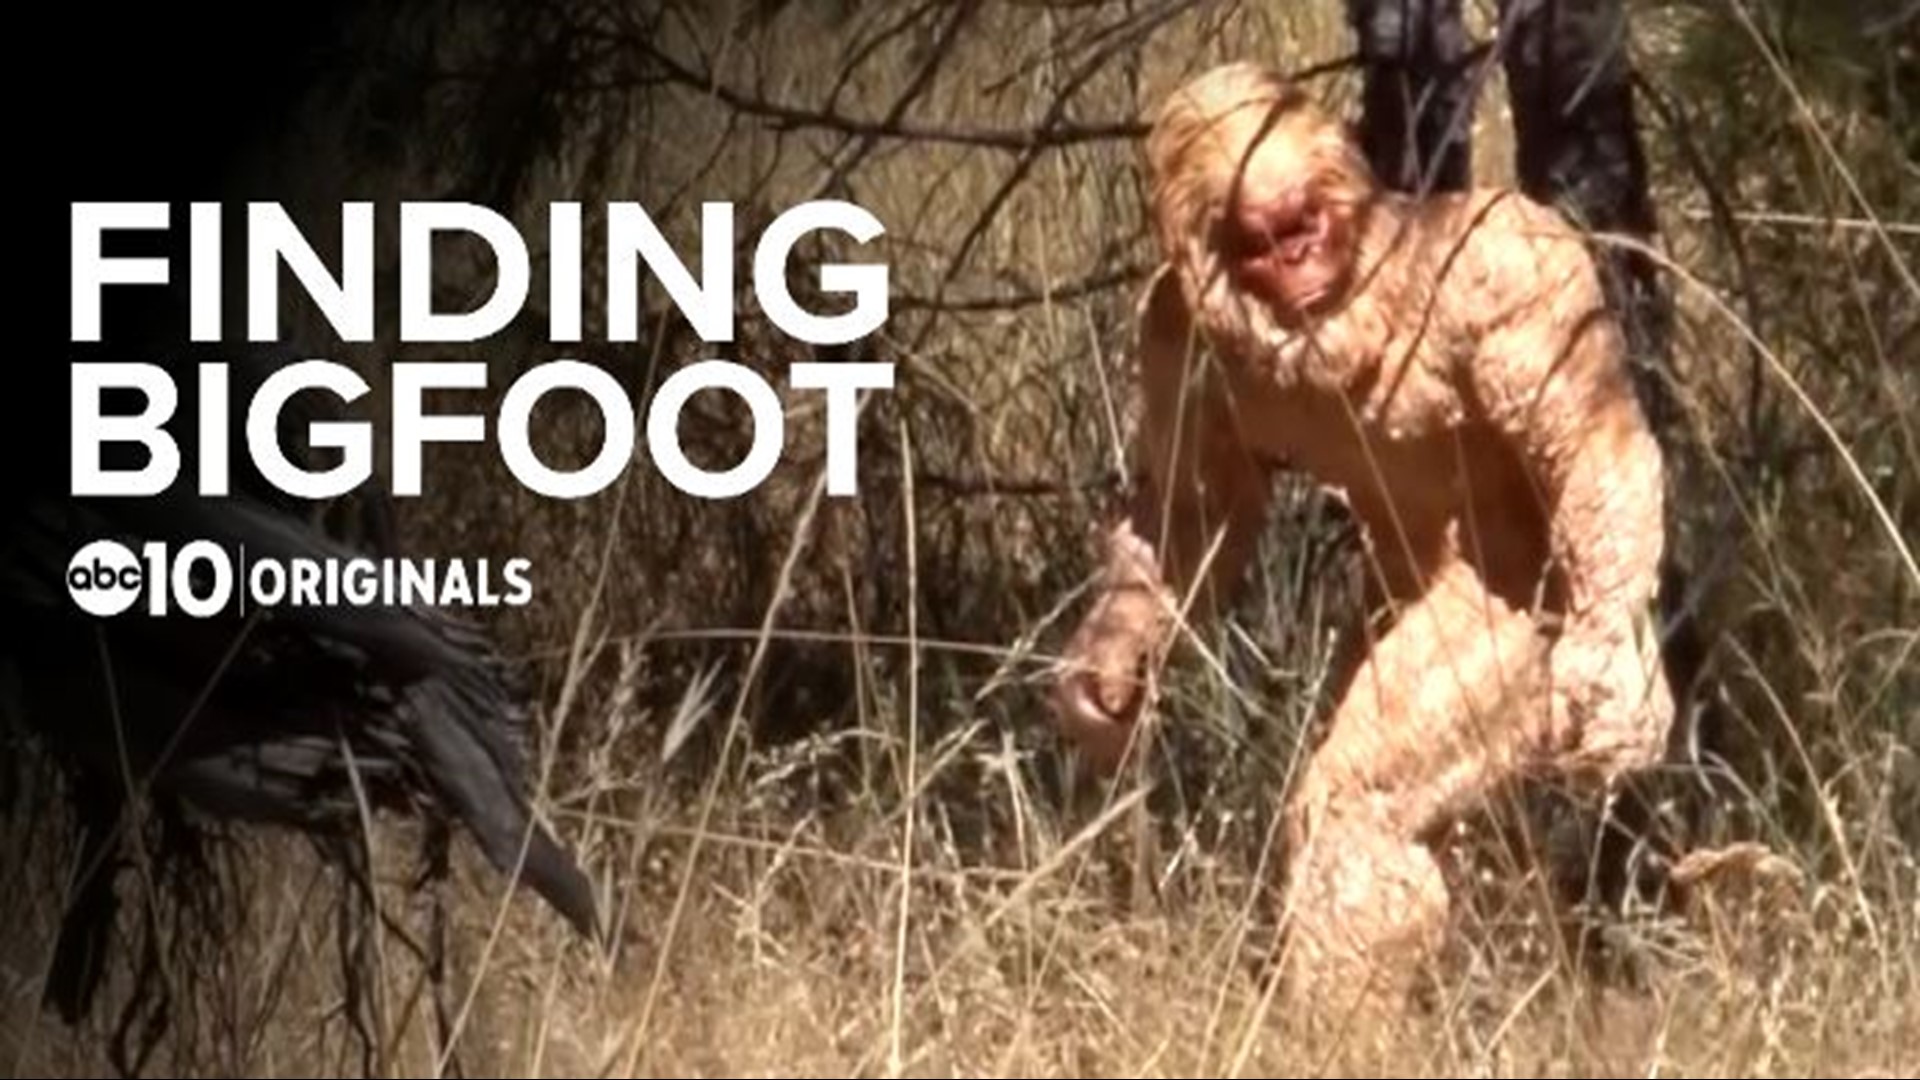 The search for Bigfoot is on in the Stanislaus National Forest.